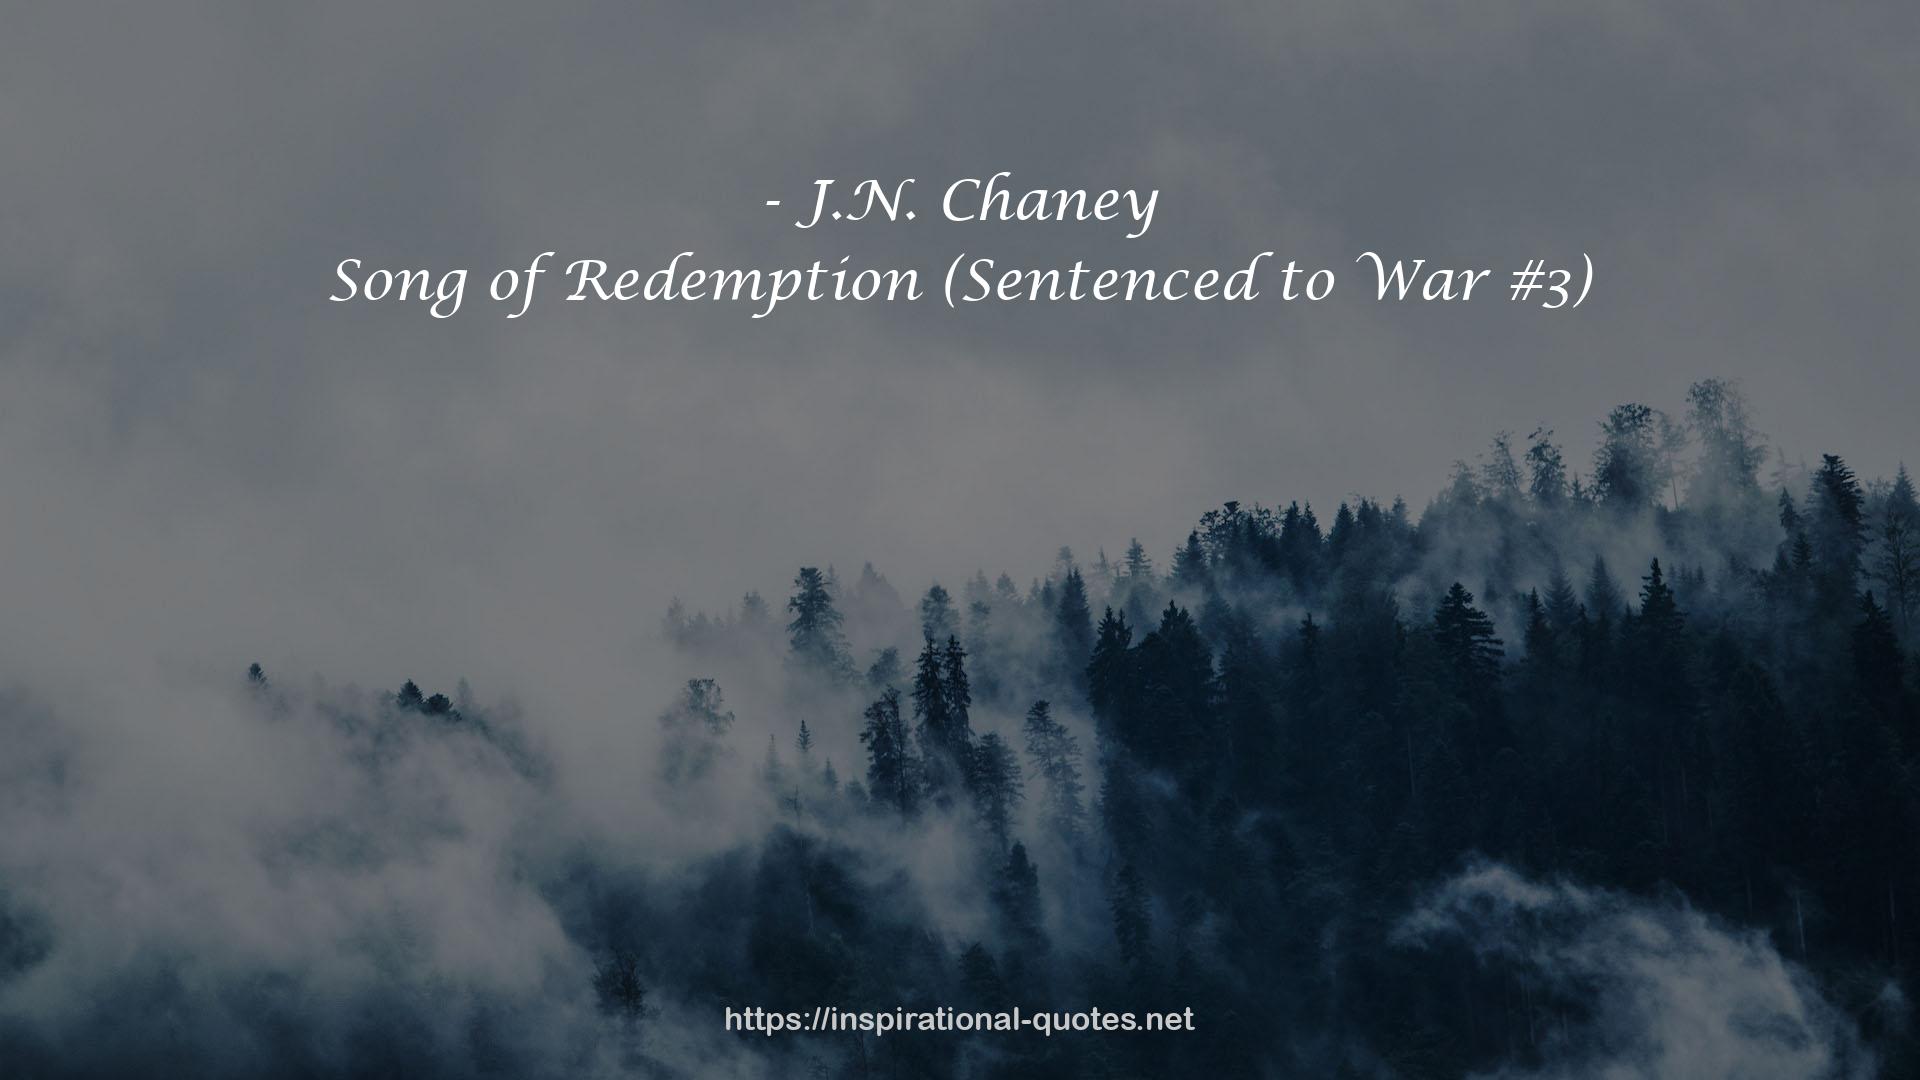 Song of Redemption (Sentenced to War #3) QUOTES